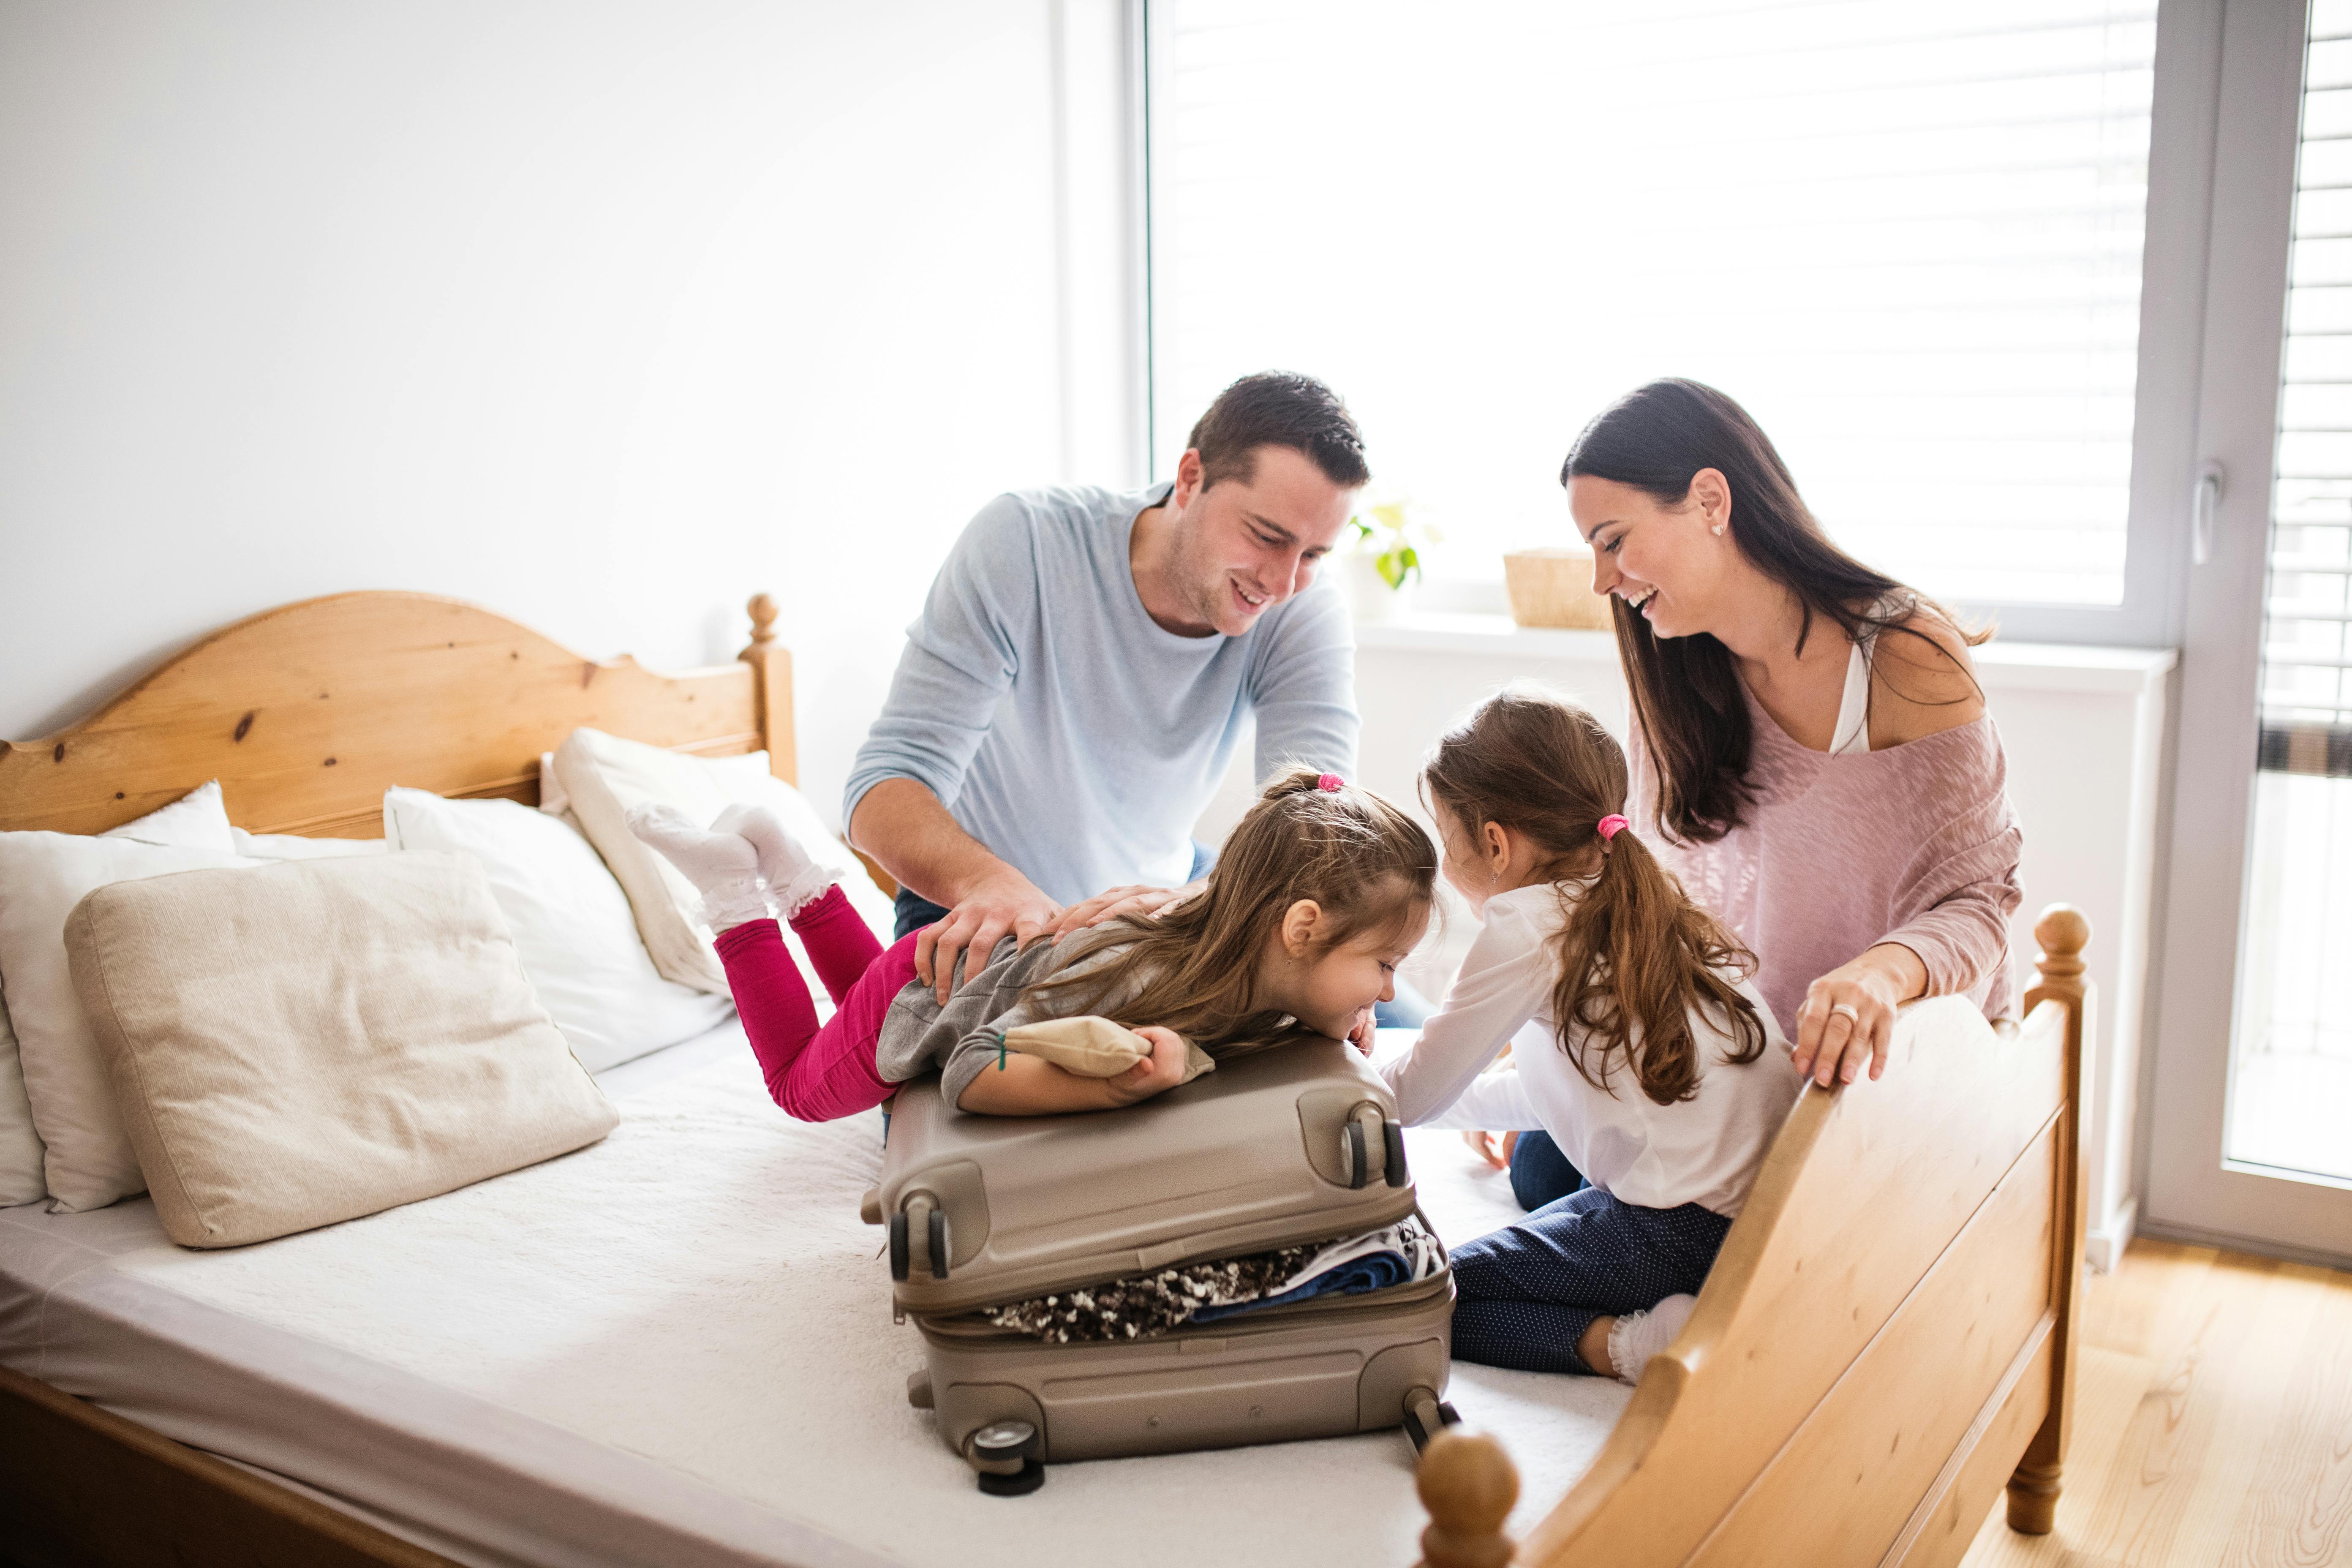 15 Best Packing Travel Hacks For Trips Near And Far - LA Family Travel